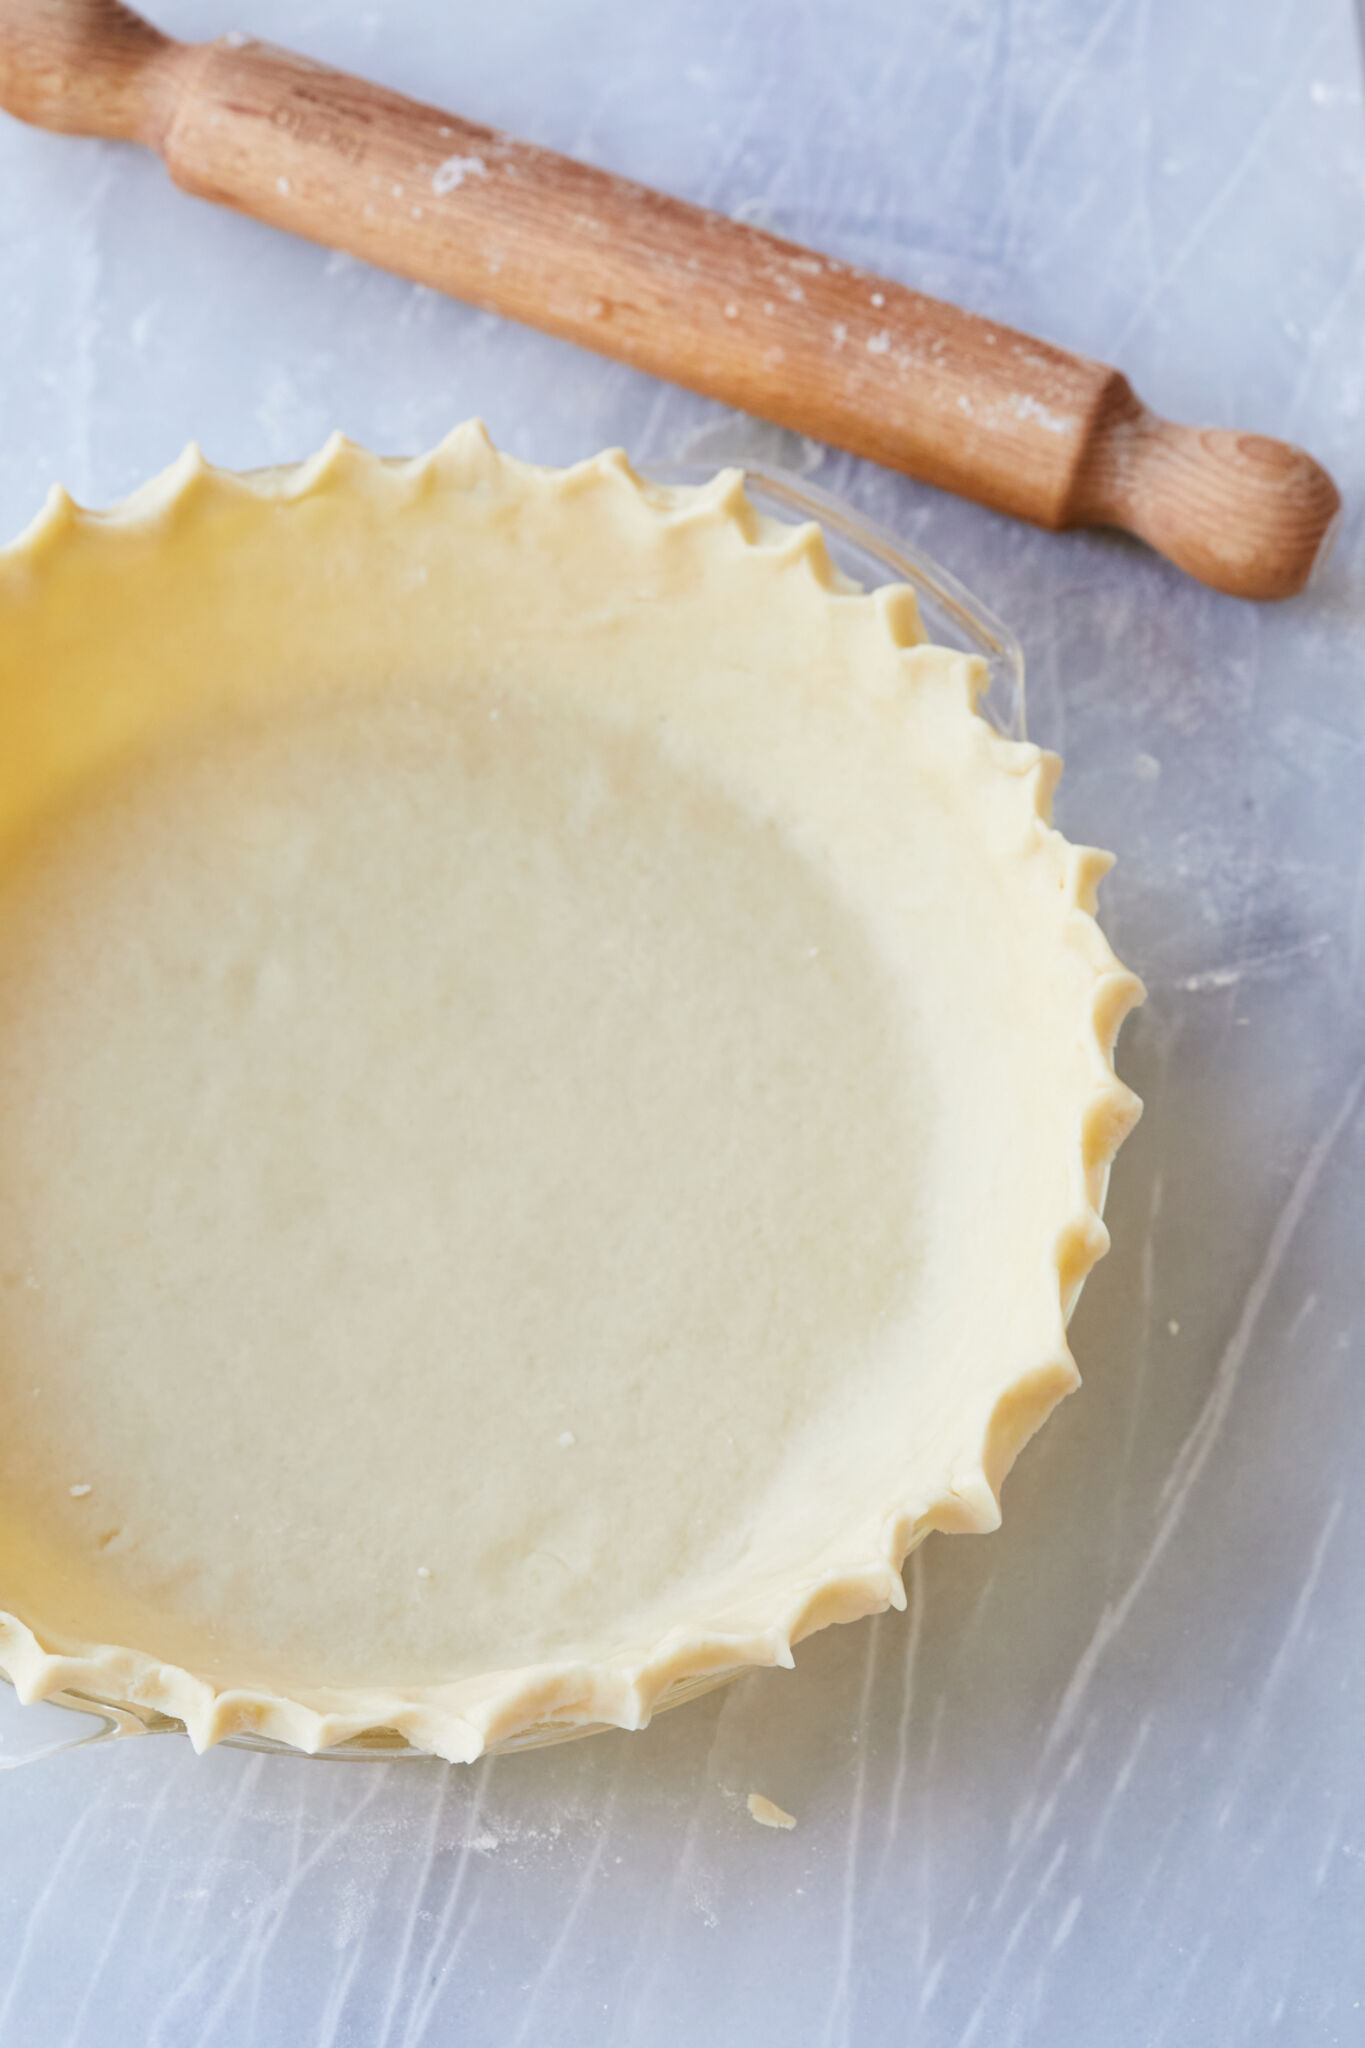 A smooth Flaky Sour Cream Pie Crust is lined in a glass pie dish , with evenly crimped edges. A wood rolling pin is placed next to the pie crust. 